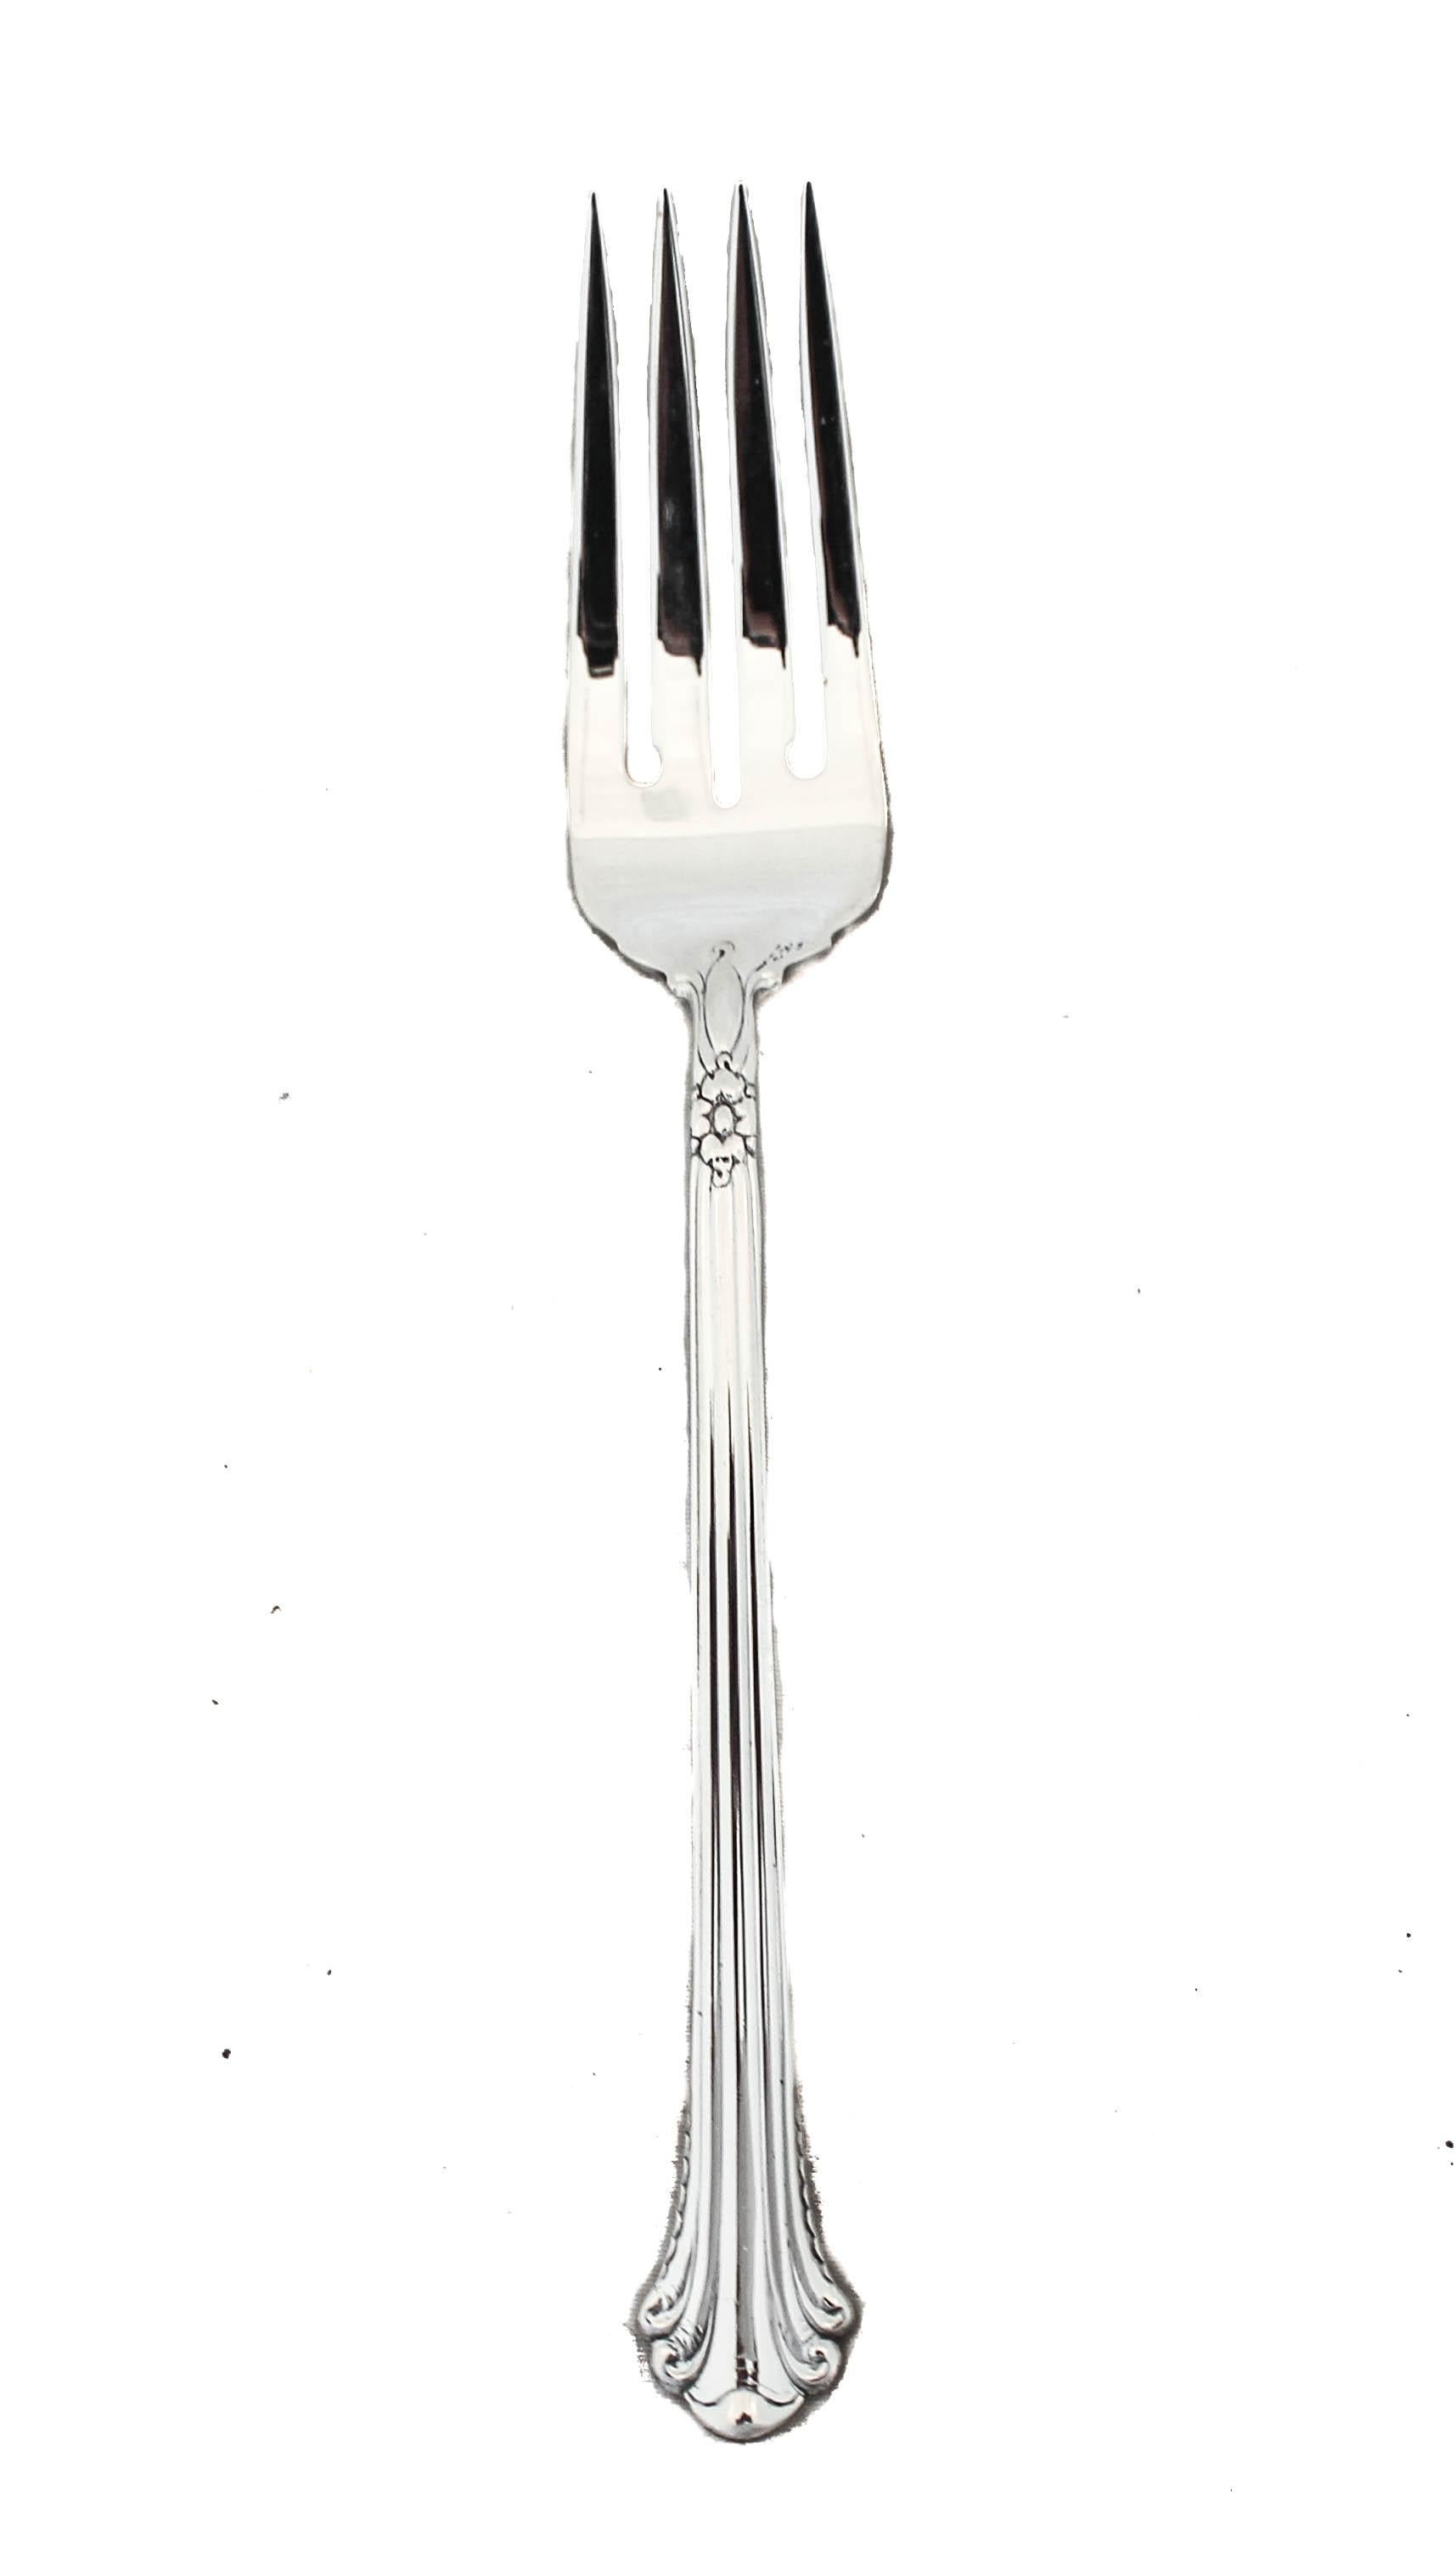 Being offered is a complete set -- service for 16 -- sterling silver flatware by Towle Silversmiths. First introduced in 1939, this pattern is still popular today as it was back then. The reason is it’s design is timeless and classic. The handle has